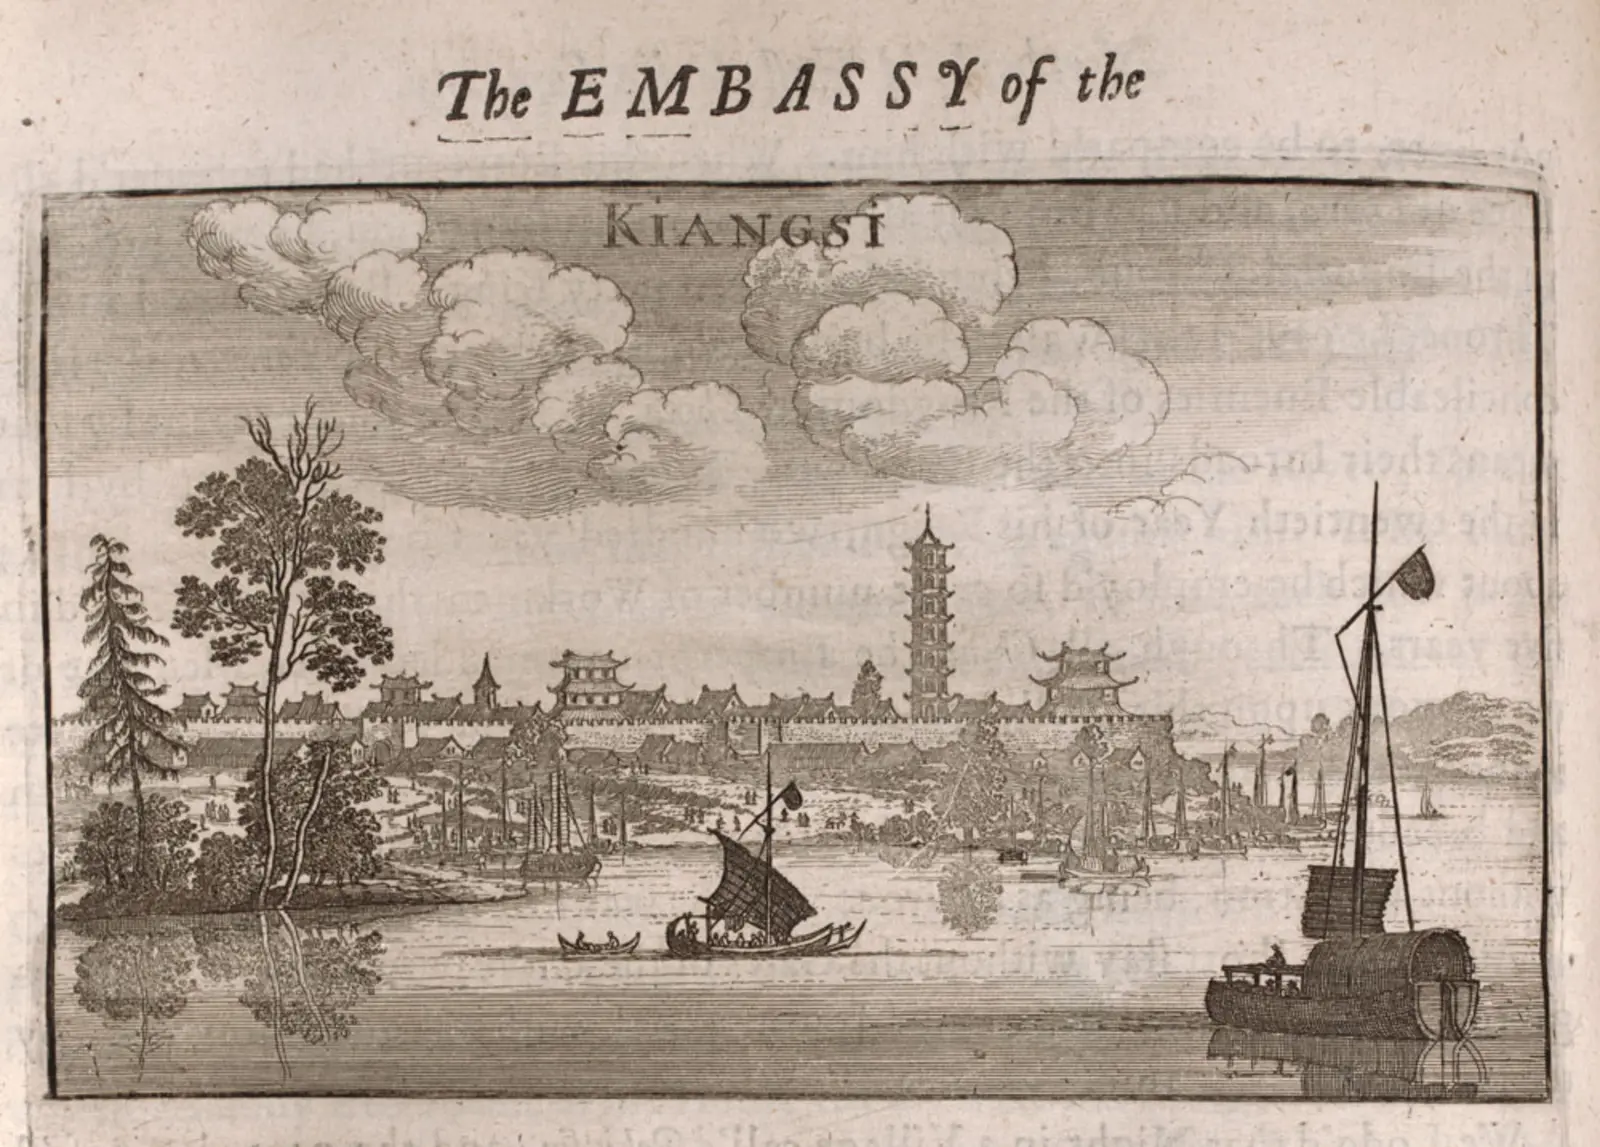 A black-and-white illustrated print of sailboats near a palace.